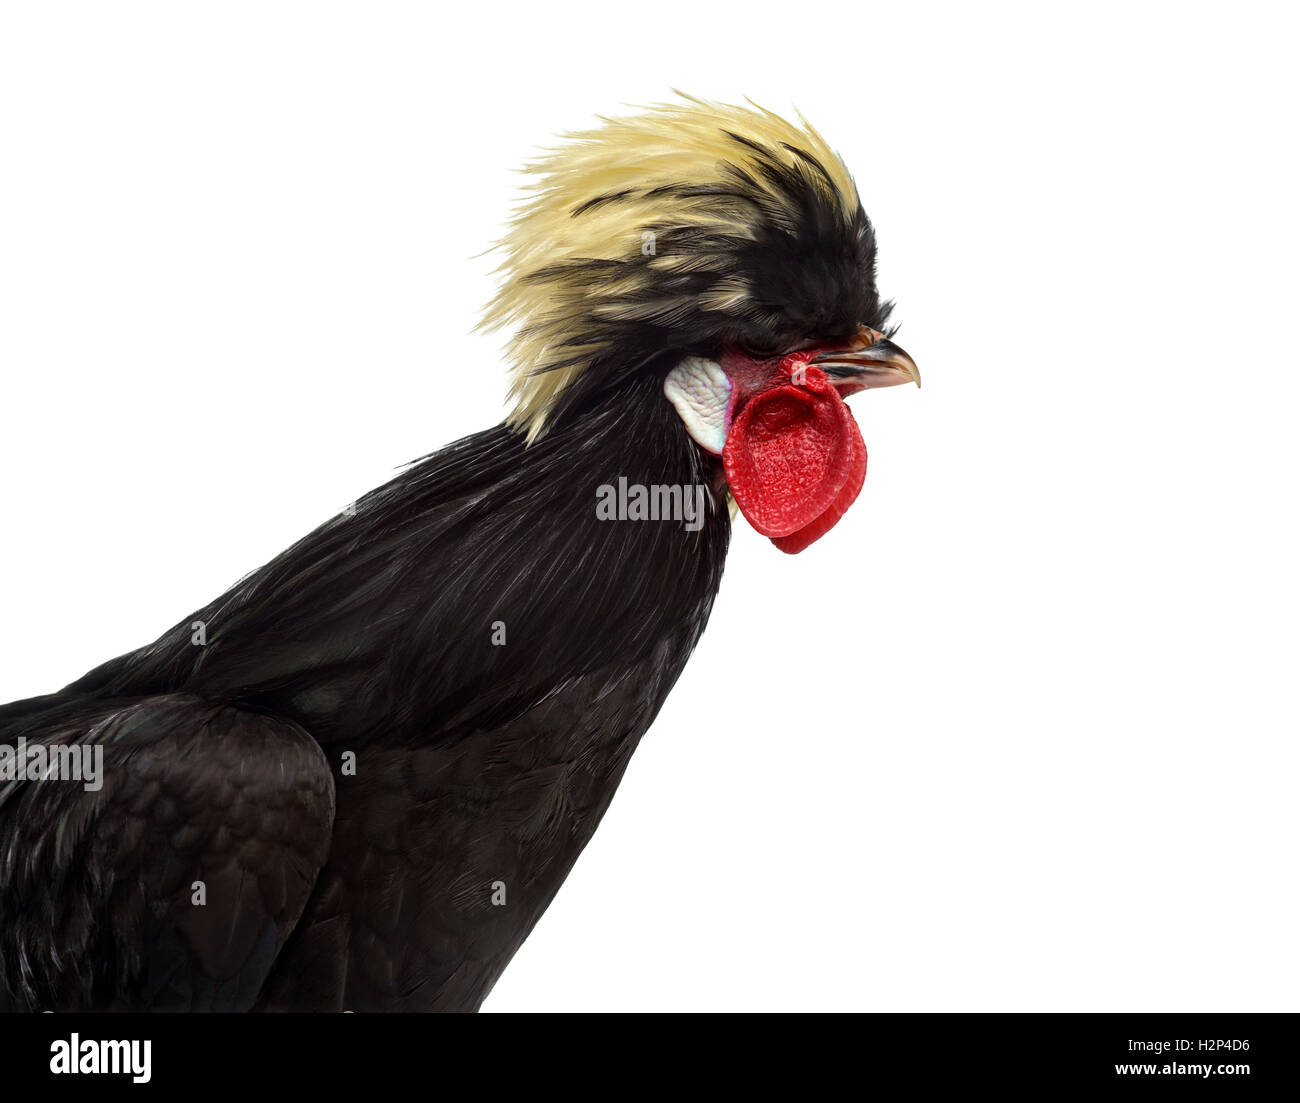 Close-up of a Polish Rooster against White background Stock Photo